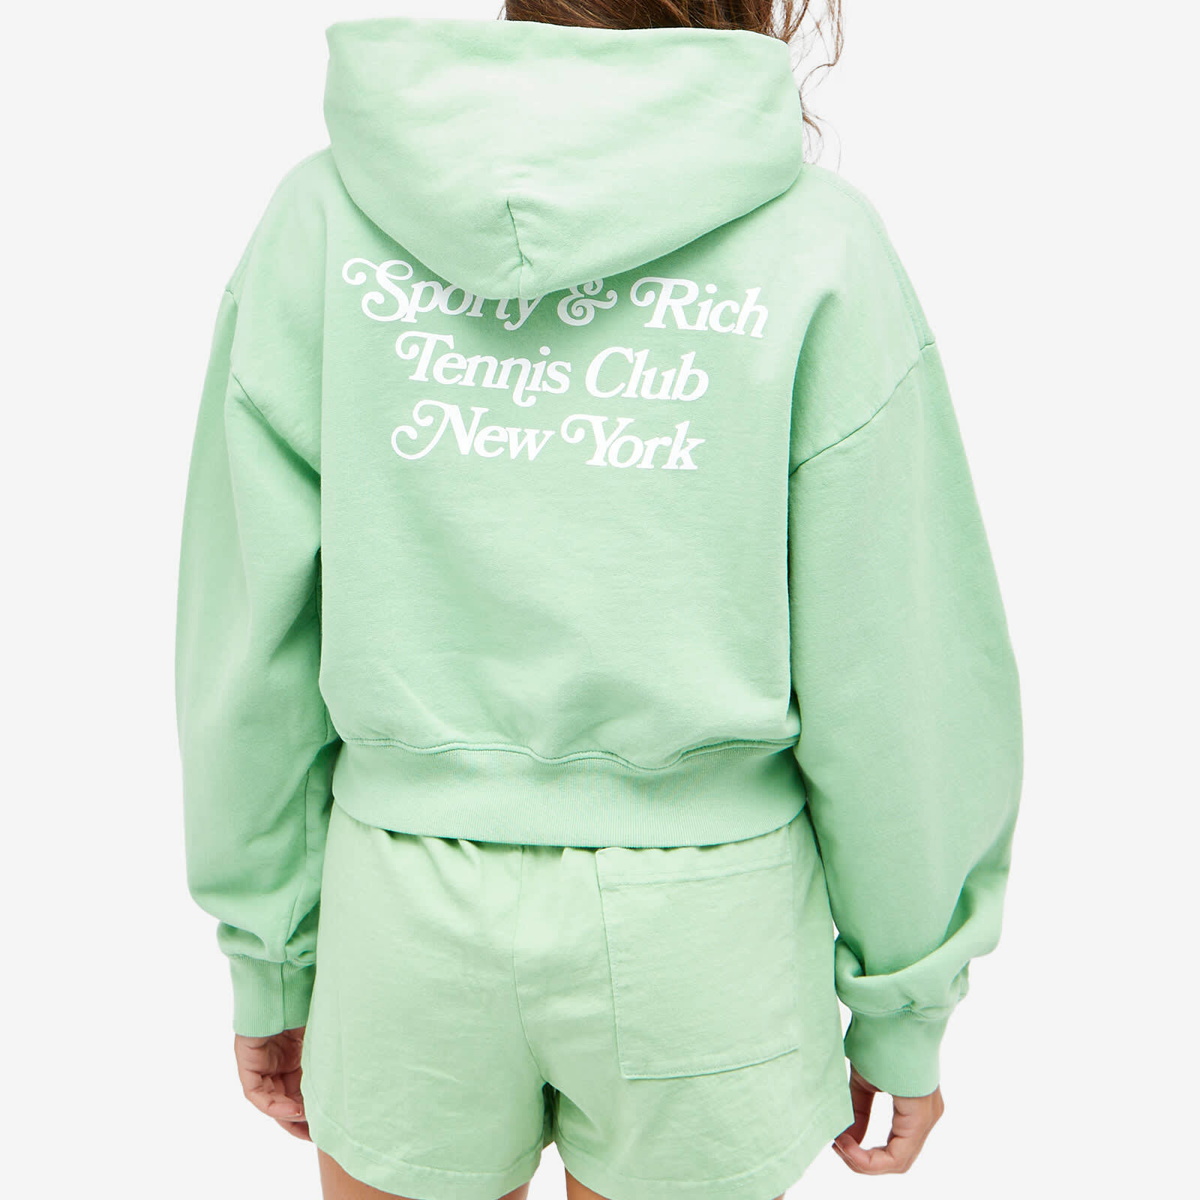 Best hoodies for women: from Nike, Sporty & Rich, Axel Arigato and